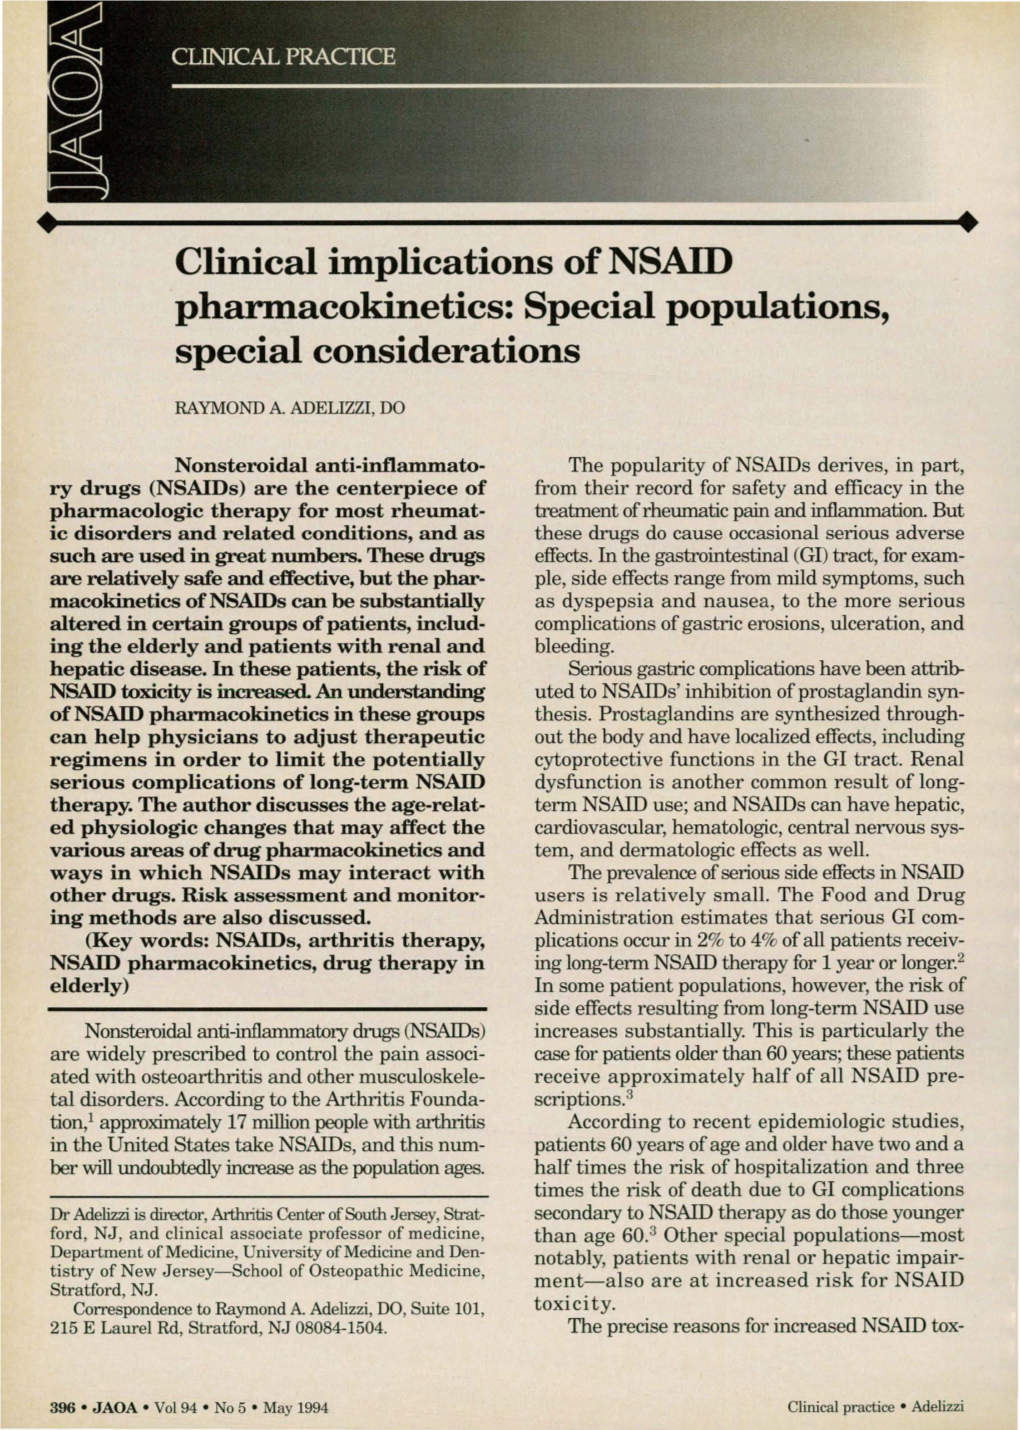 Clinical Implications of NSAID Pharmacokinetics: Special Populations, Special Considerations